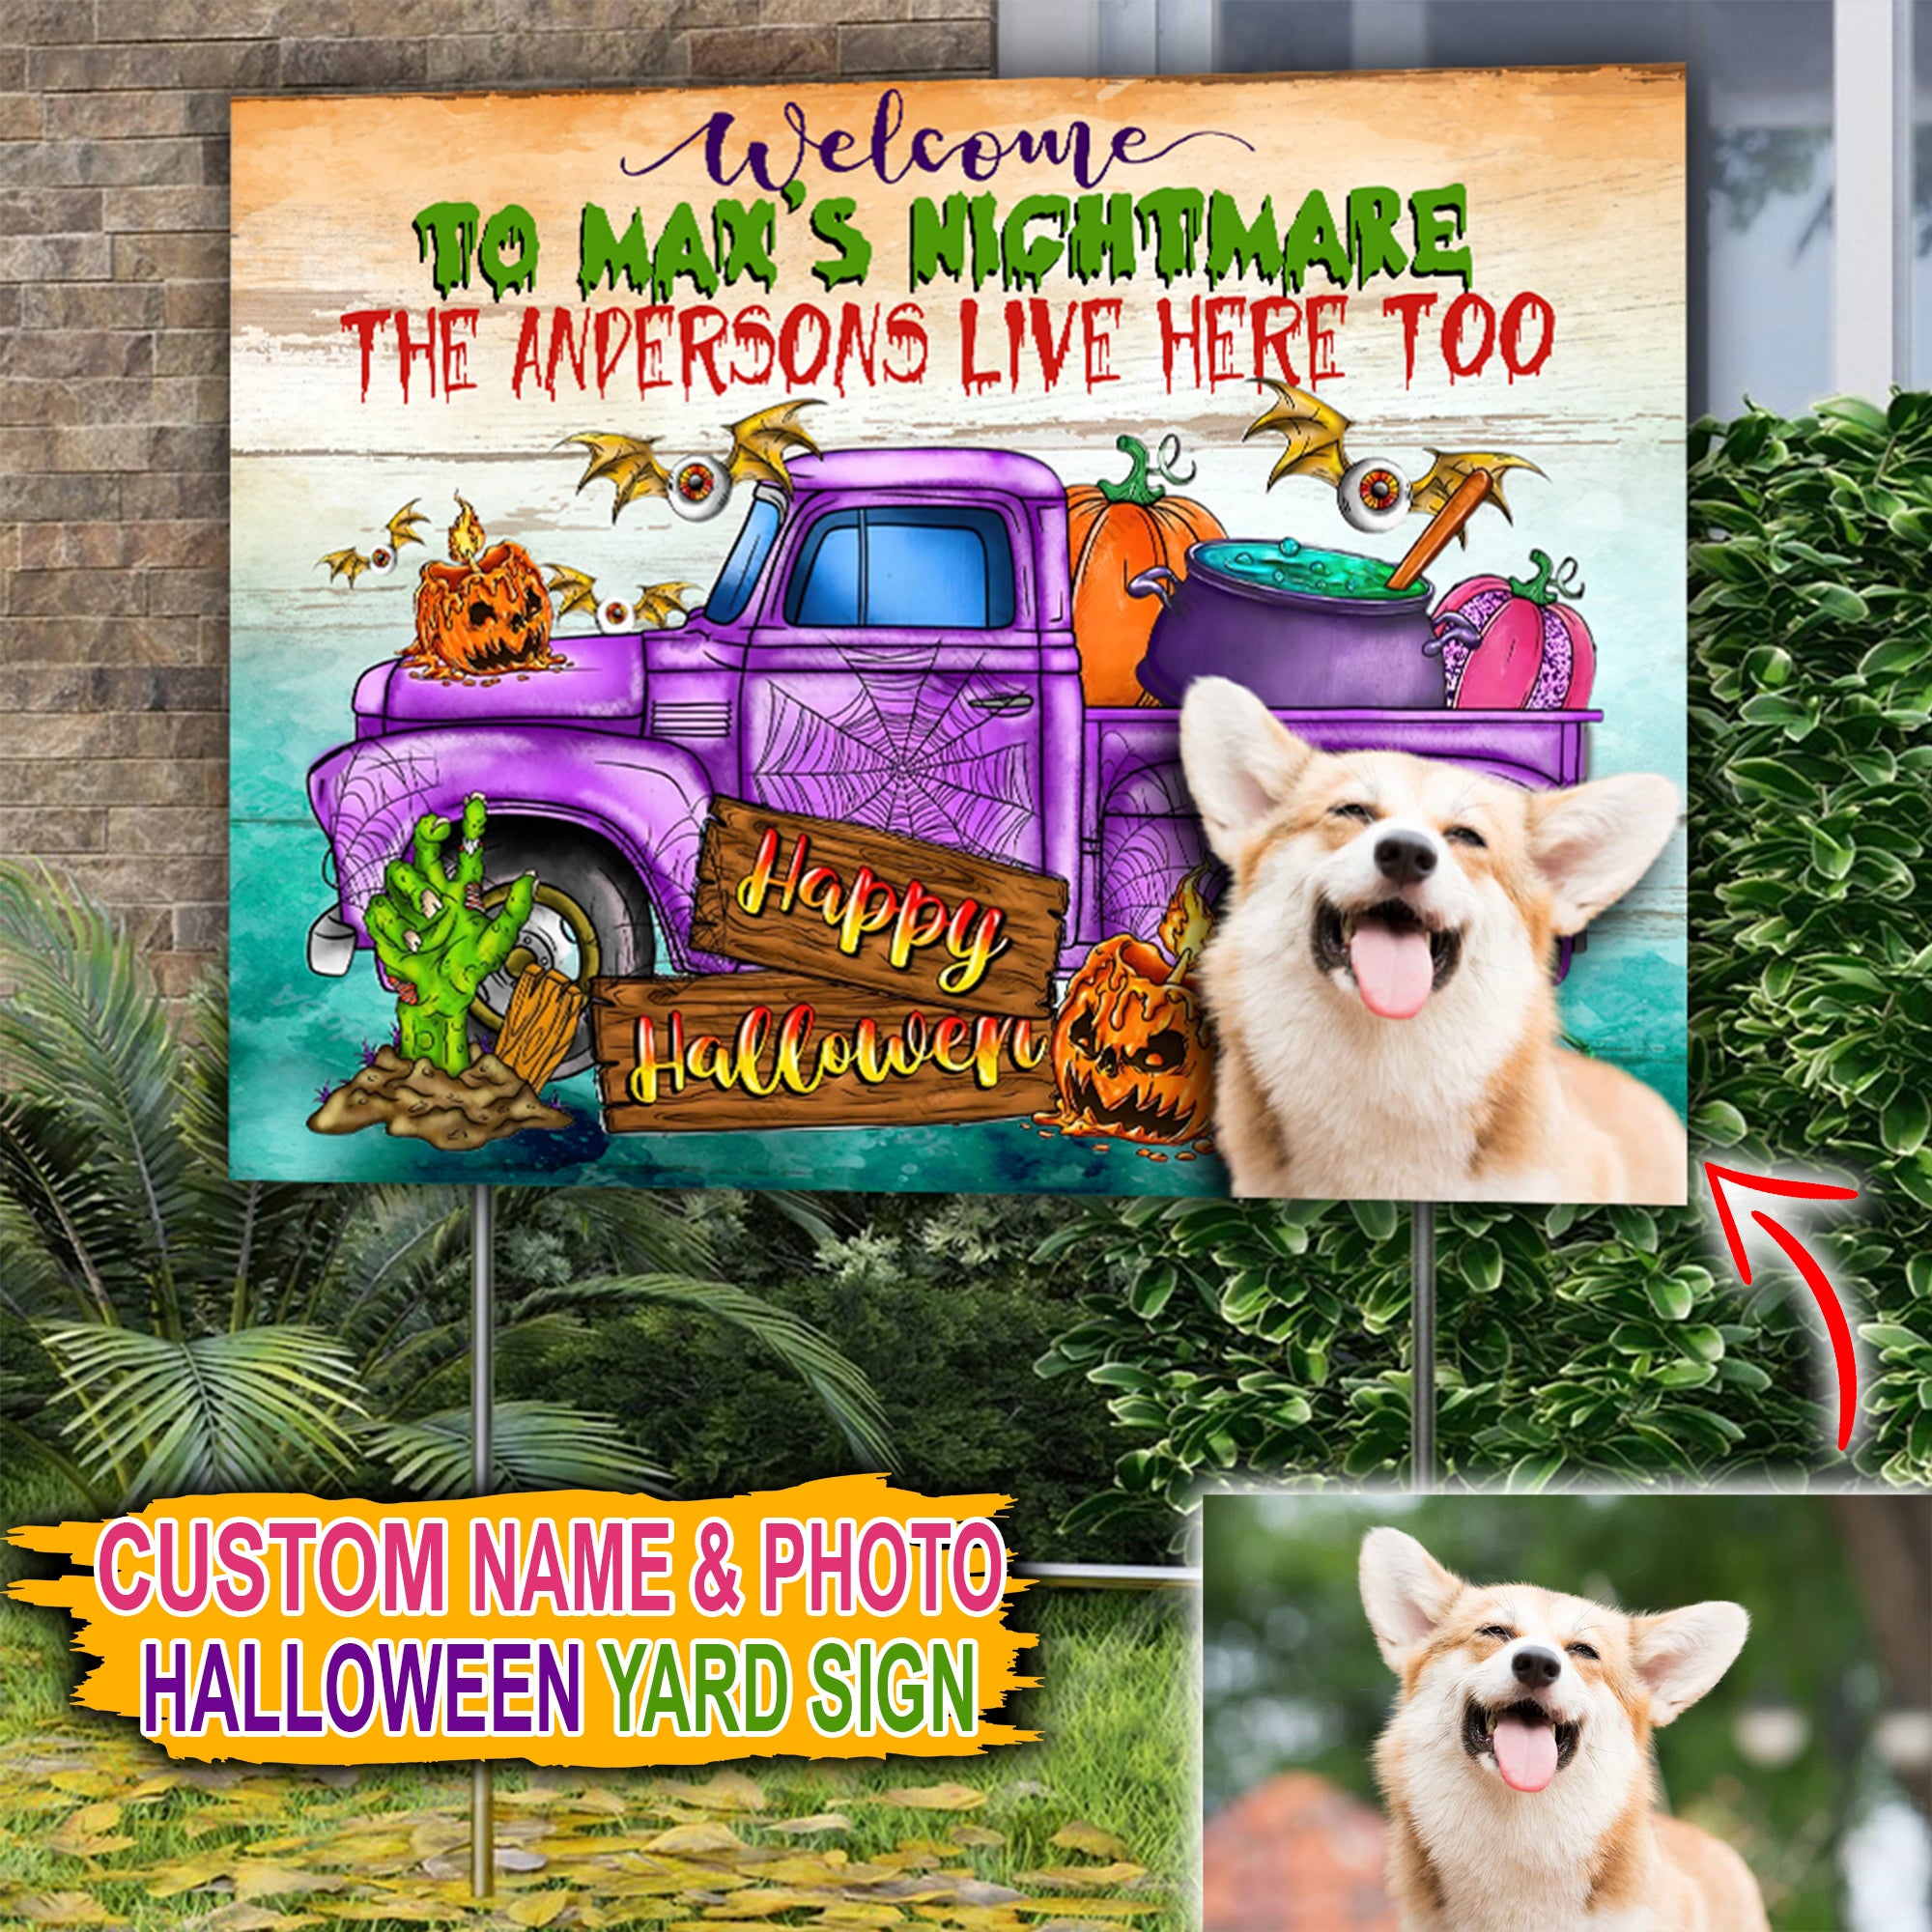 Welcome To The Dog Nightmare - Humans Live Here Too - Personalized Dog Lawn Sign, Yard Sign, Gift For Pet Lover, Halloween Gift